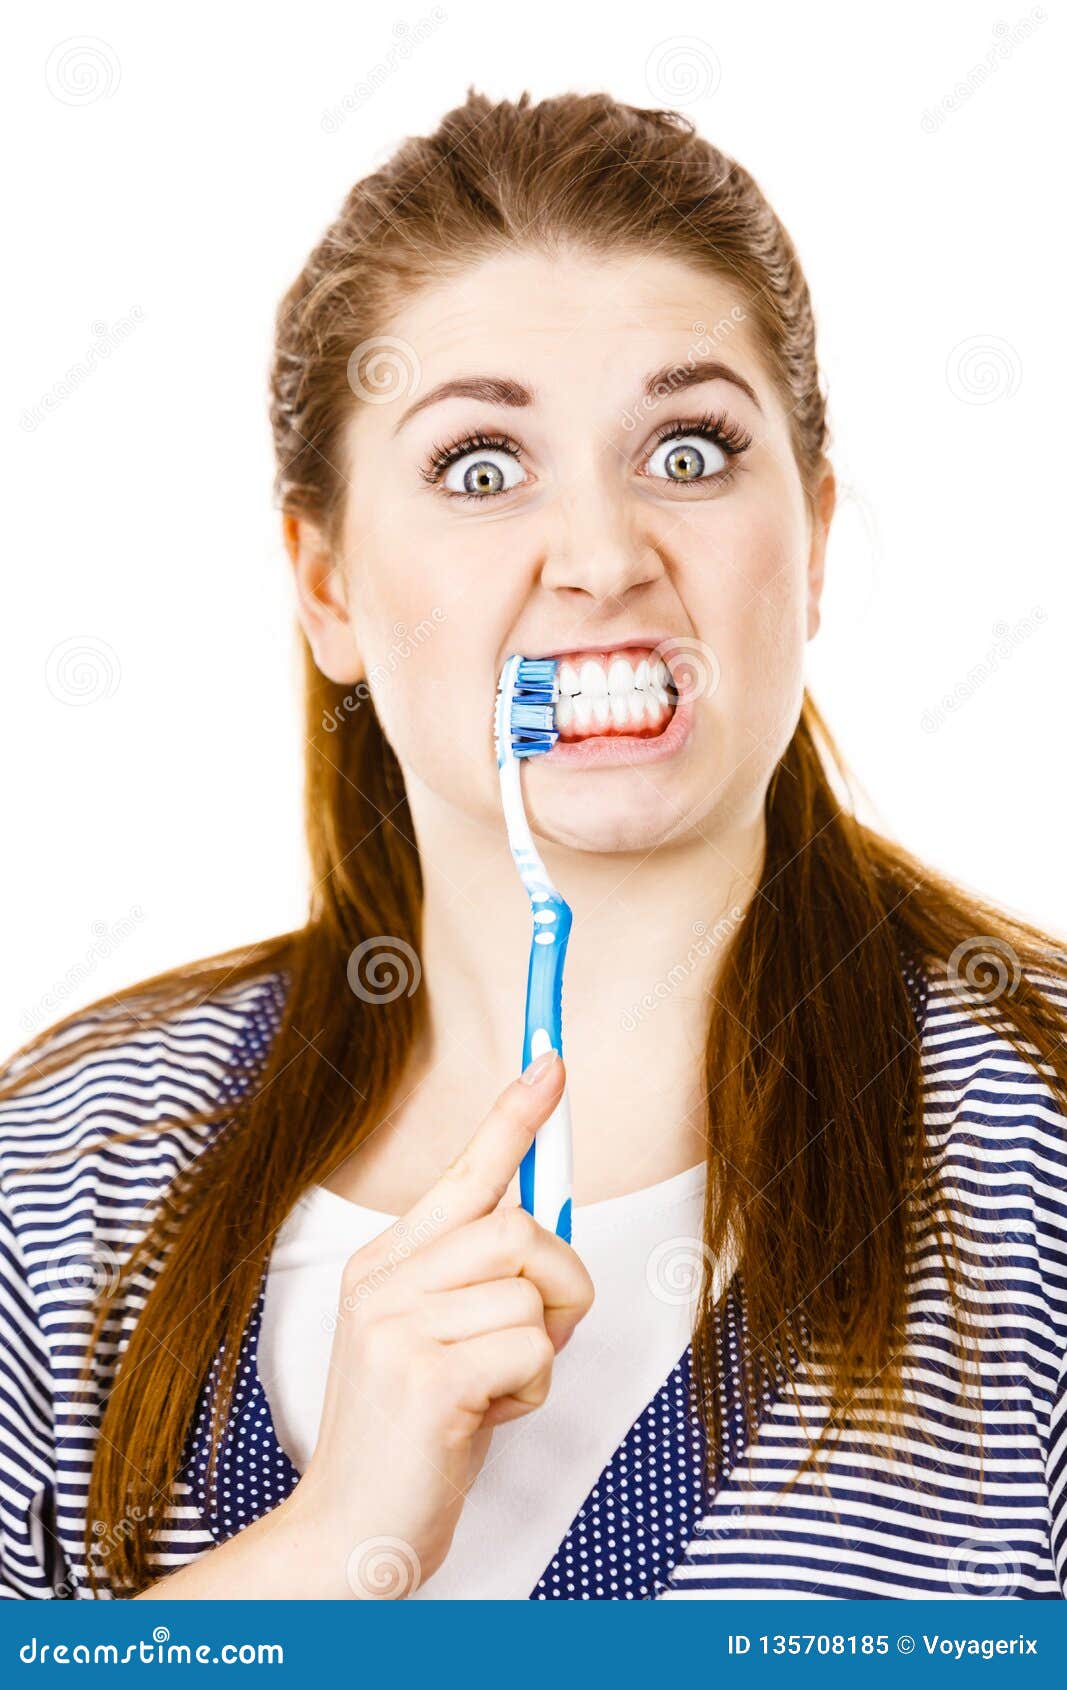 Woman Brushing Cleaning Teeth Stock Image Image of